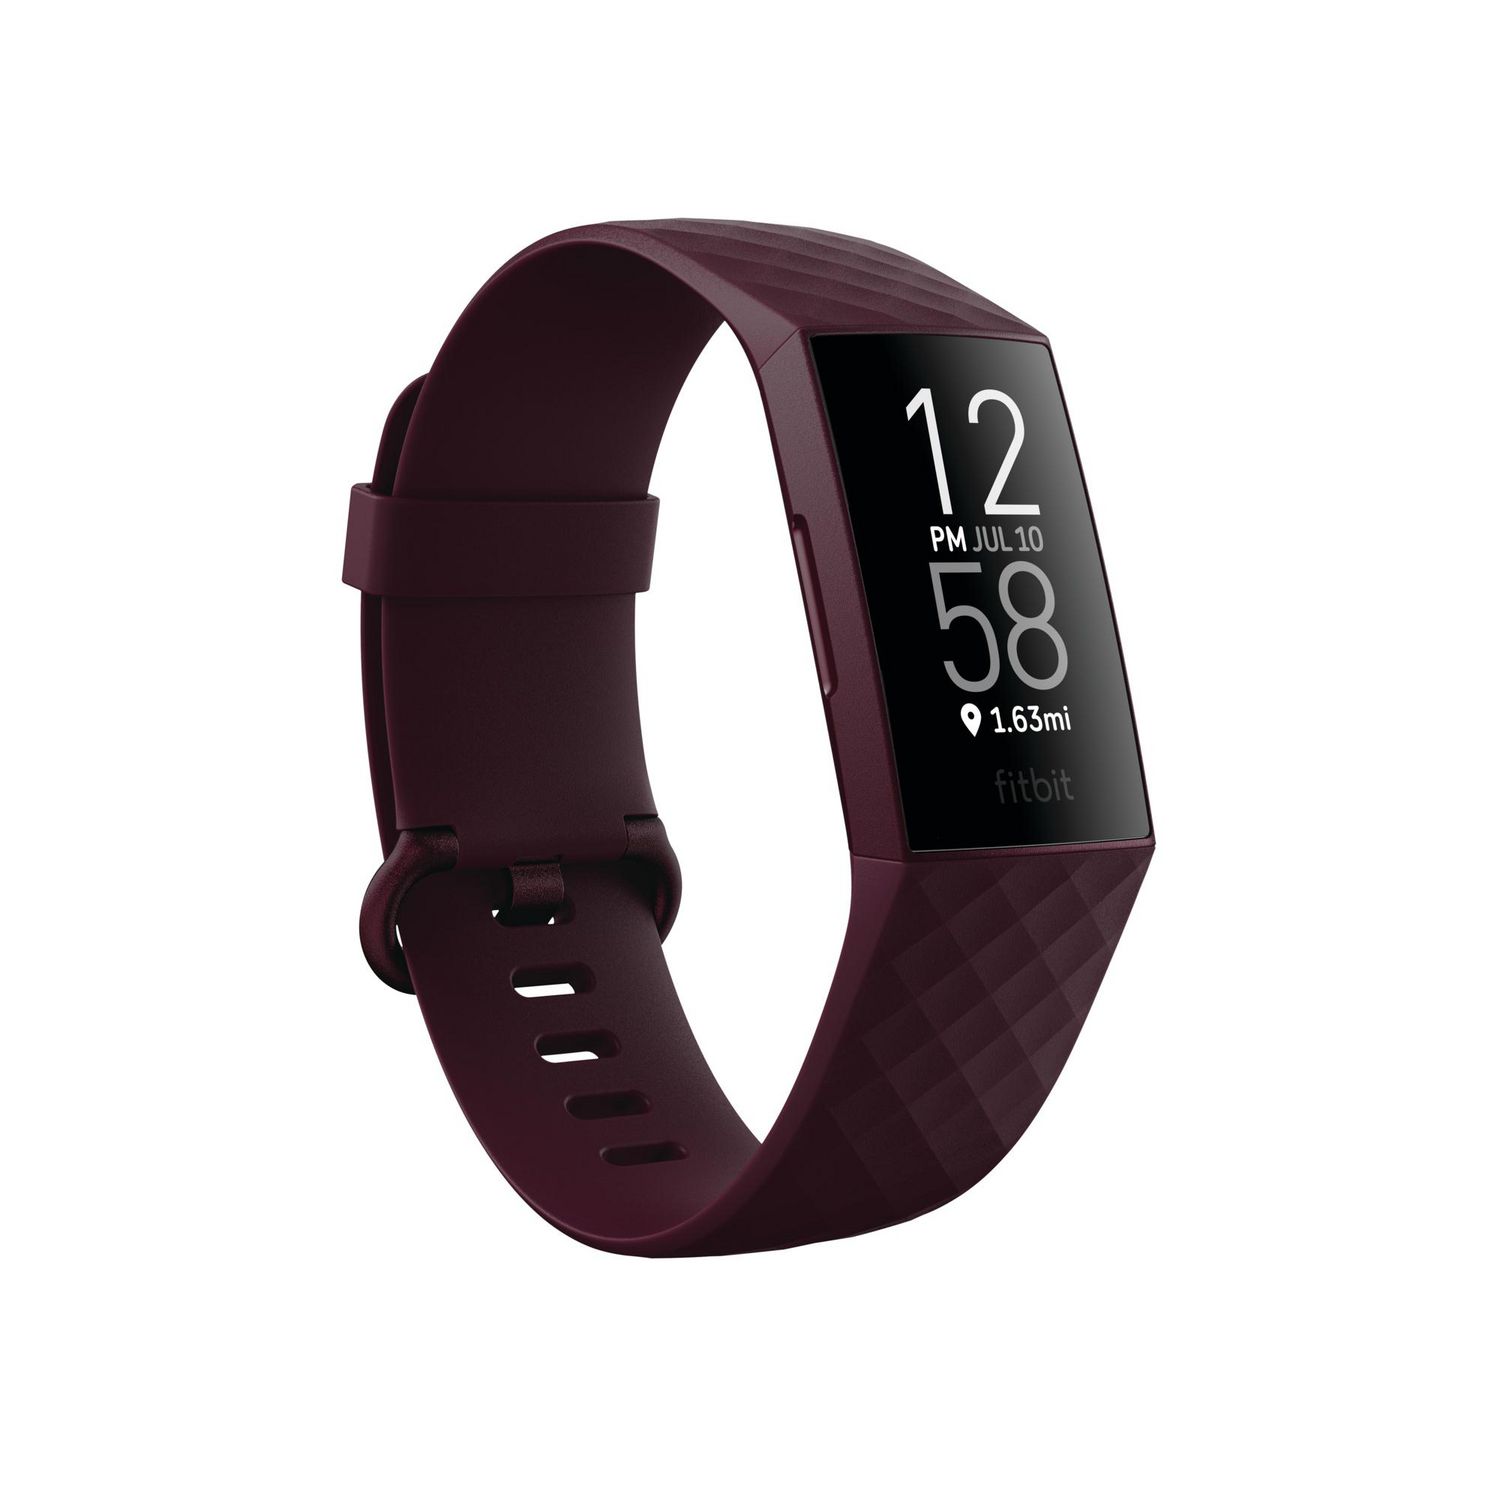 fitbit coupons canada